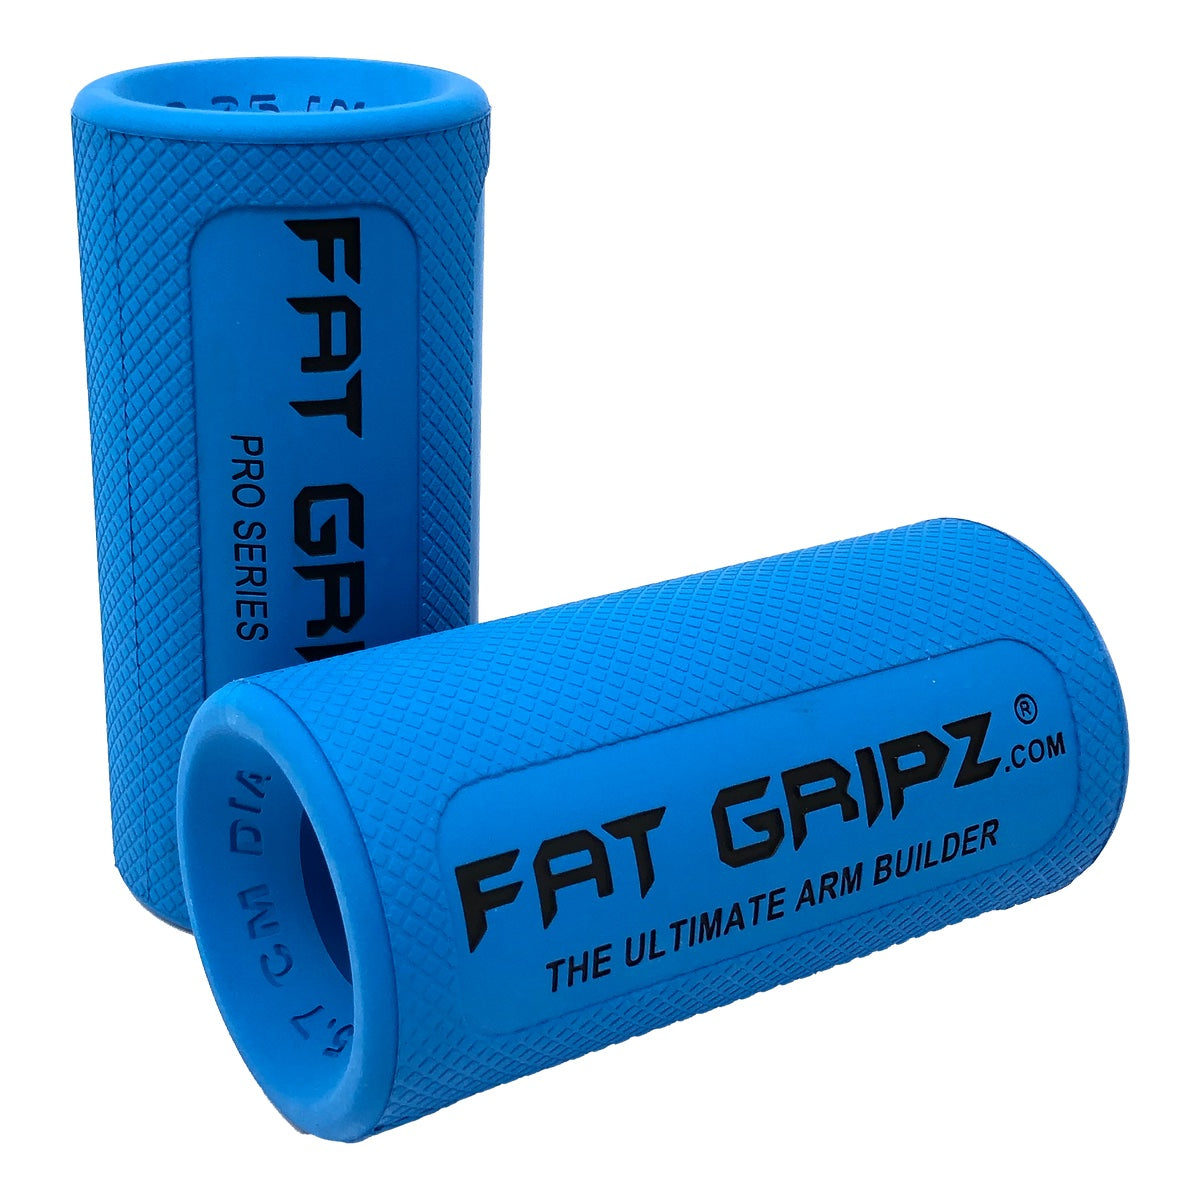 Fat Gripz Pro - Special Edition Black (New) (2.25 Outer Diameter)